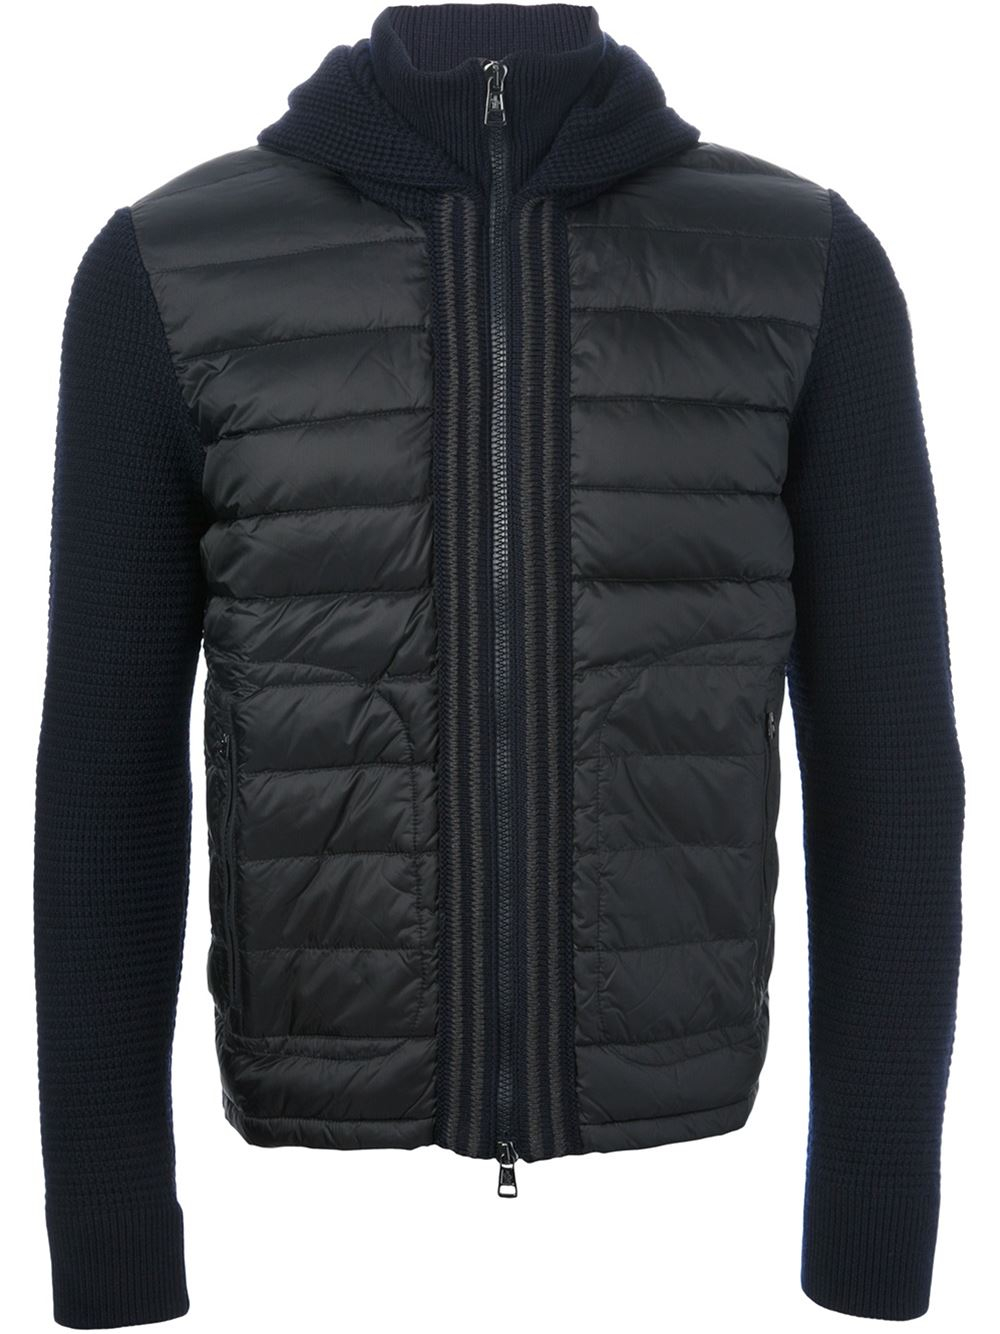 Lyst - Moncler Canut Knitted Jacket in Blue for Men